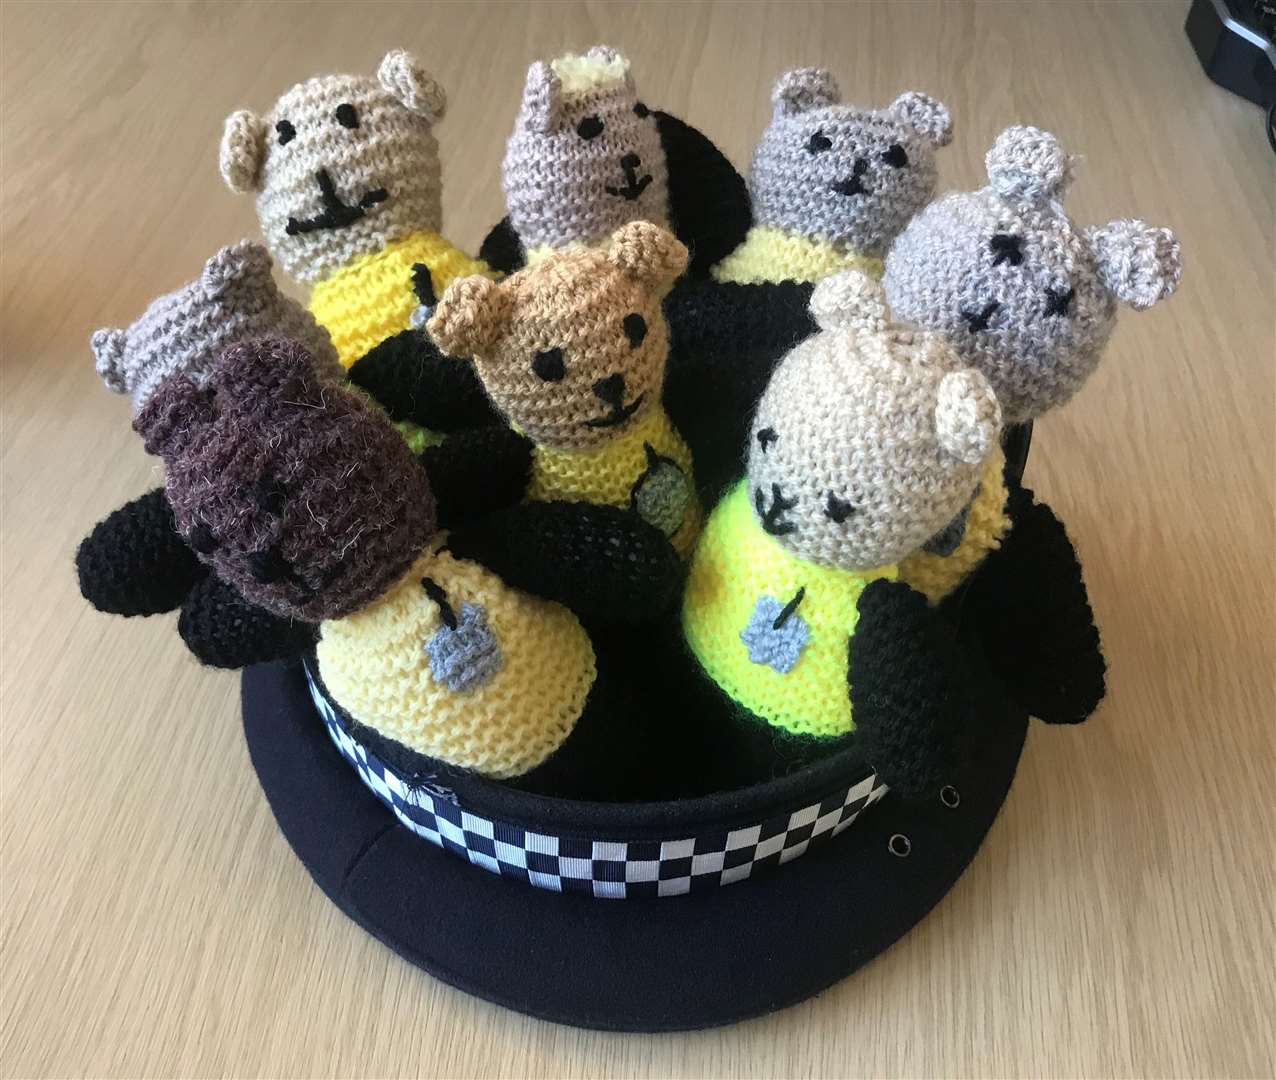 Almost 100 Bobby Buddies have been knitted to help children in distress (4495332)